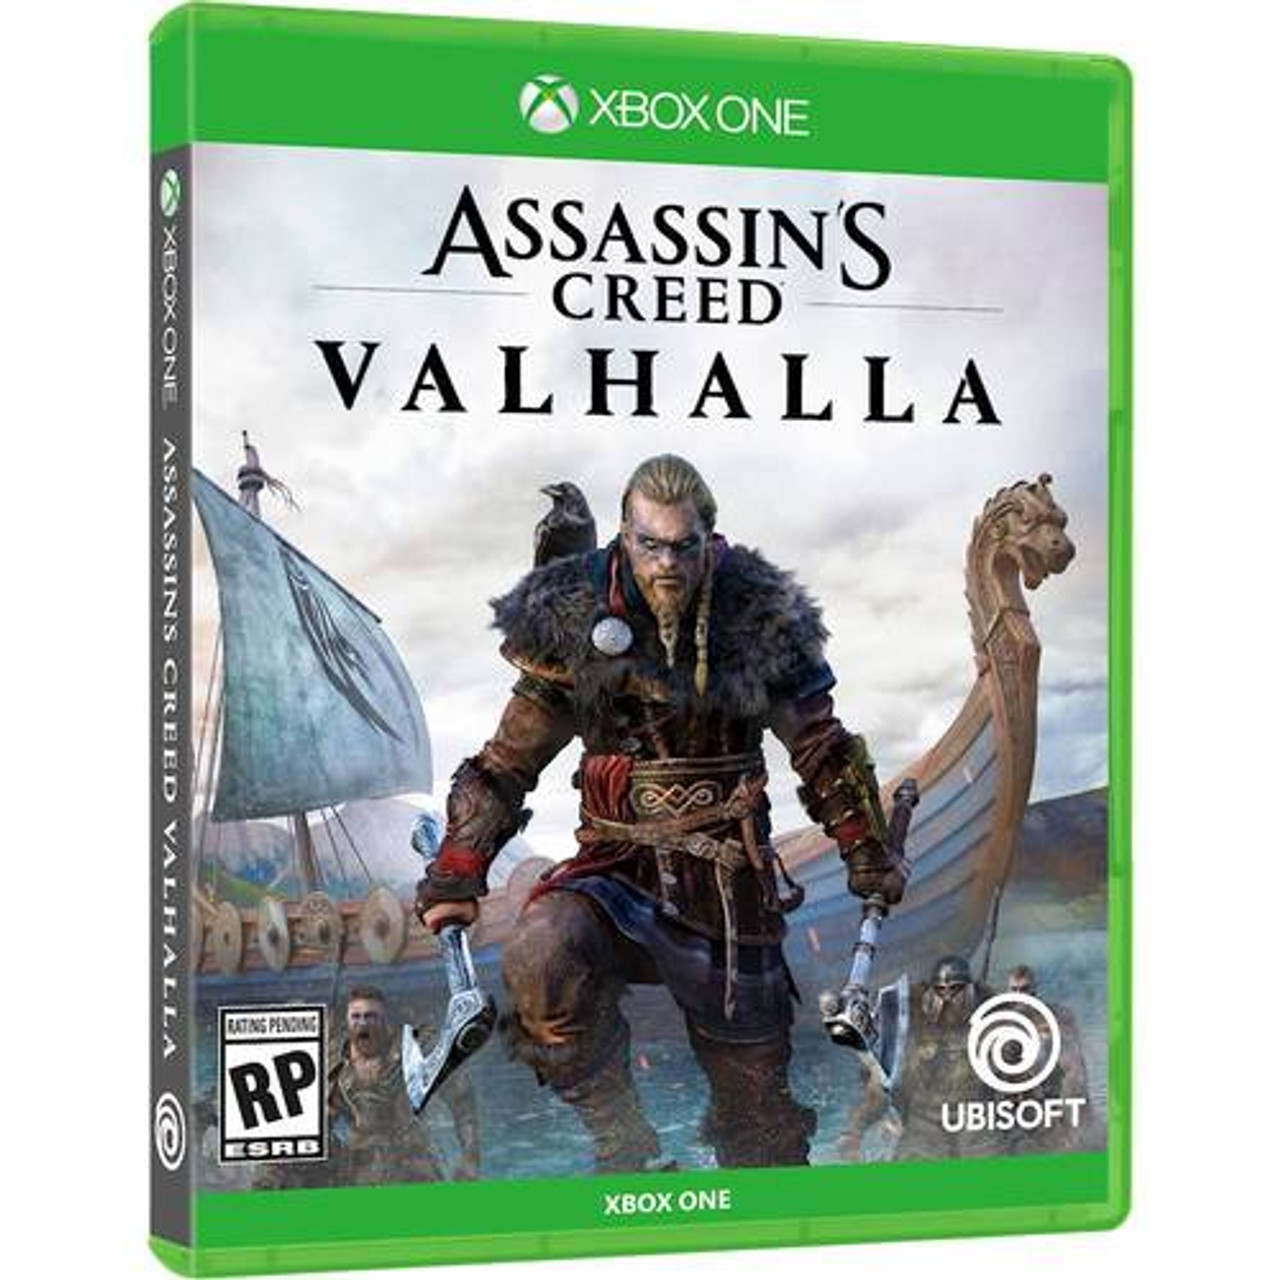 Assassin's Creed Valhalla Standard Edition - Xbox One